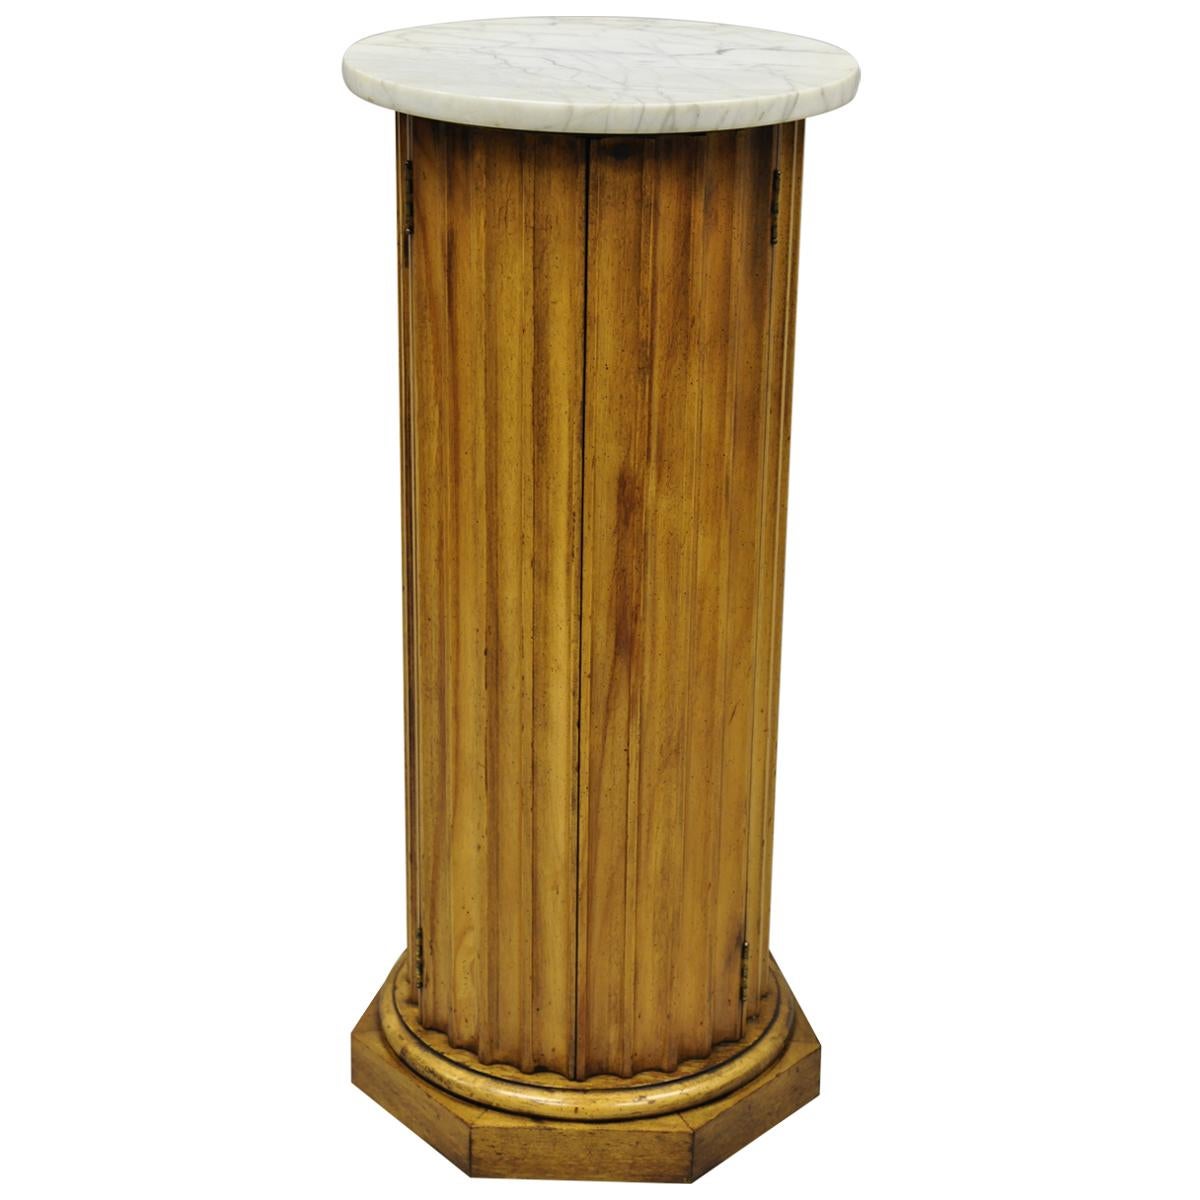 Vintage Carved Wood Fluted Pedestal Plant Stand Cabinet with Round Marble Top